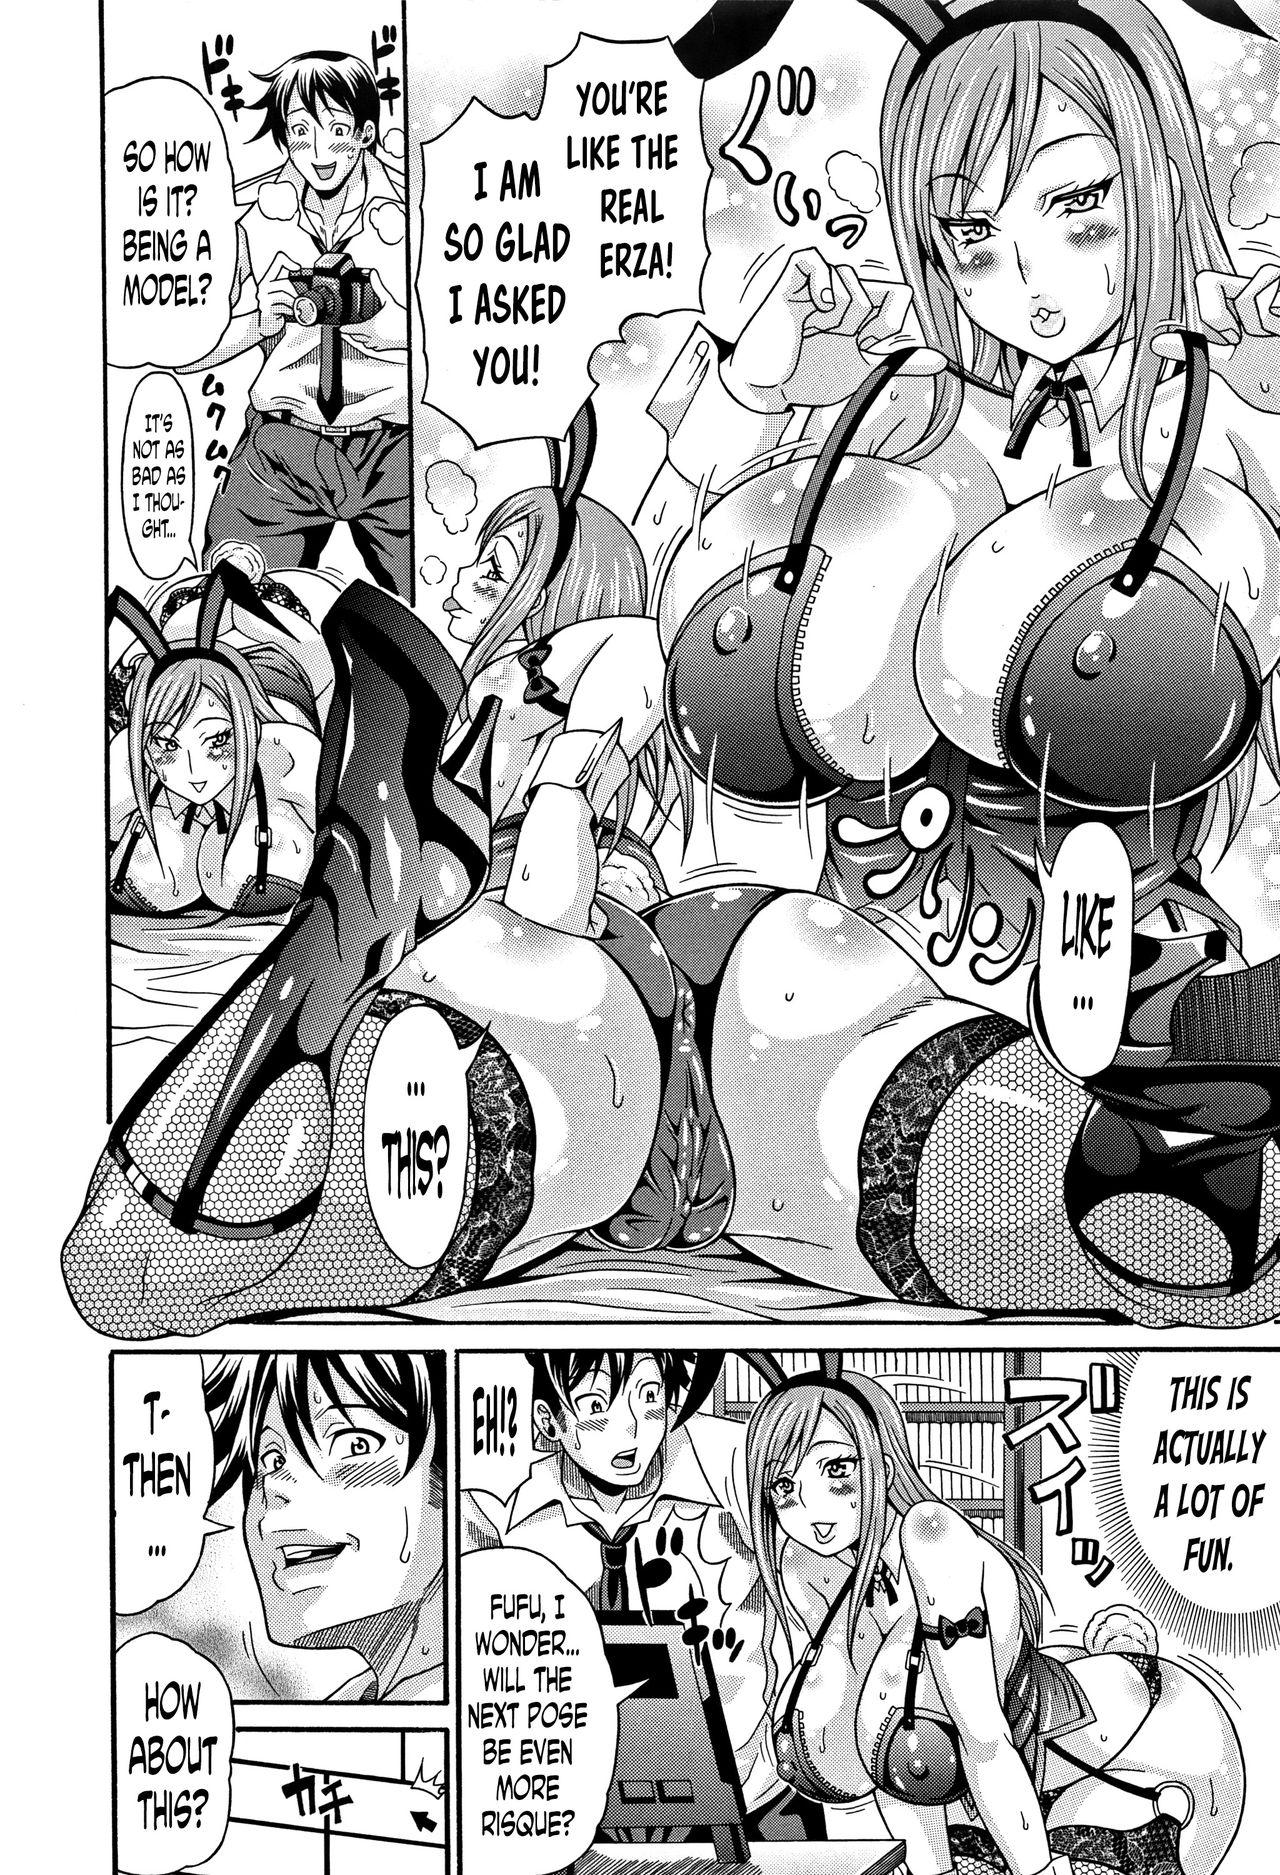 [Andou Hiroyuki] Mamire Chichi - Sticky Tits Feel Hot All Over. Ch.1-3 [English] [doujin-moe.us] 24